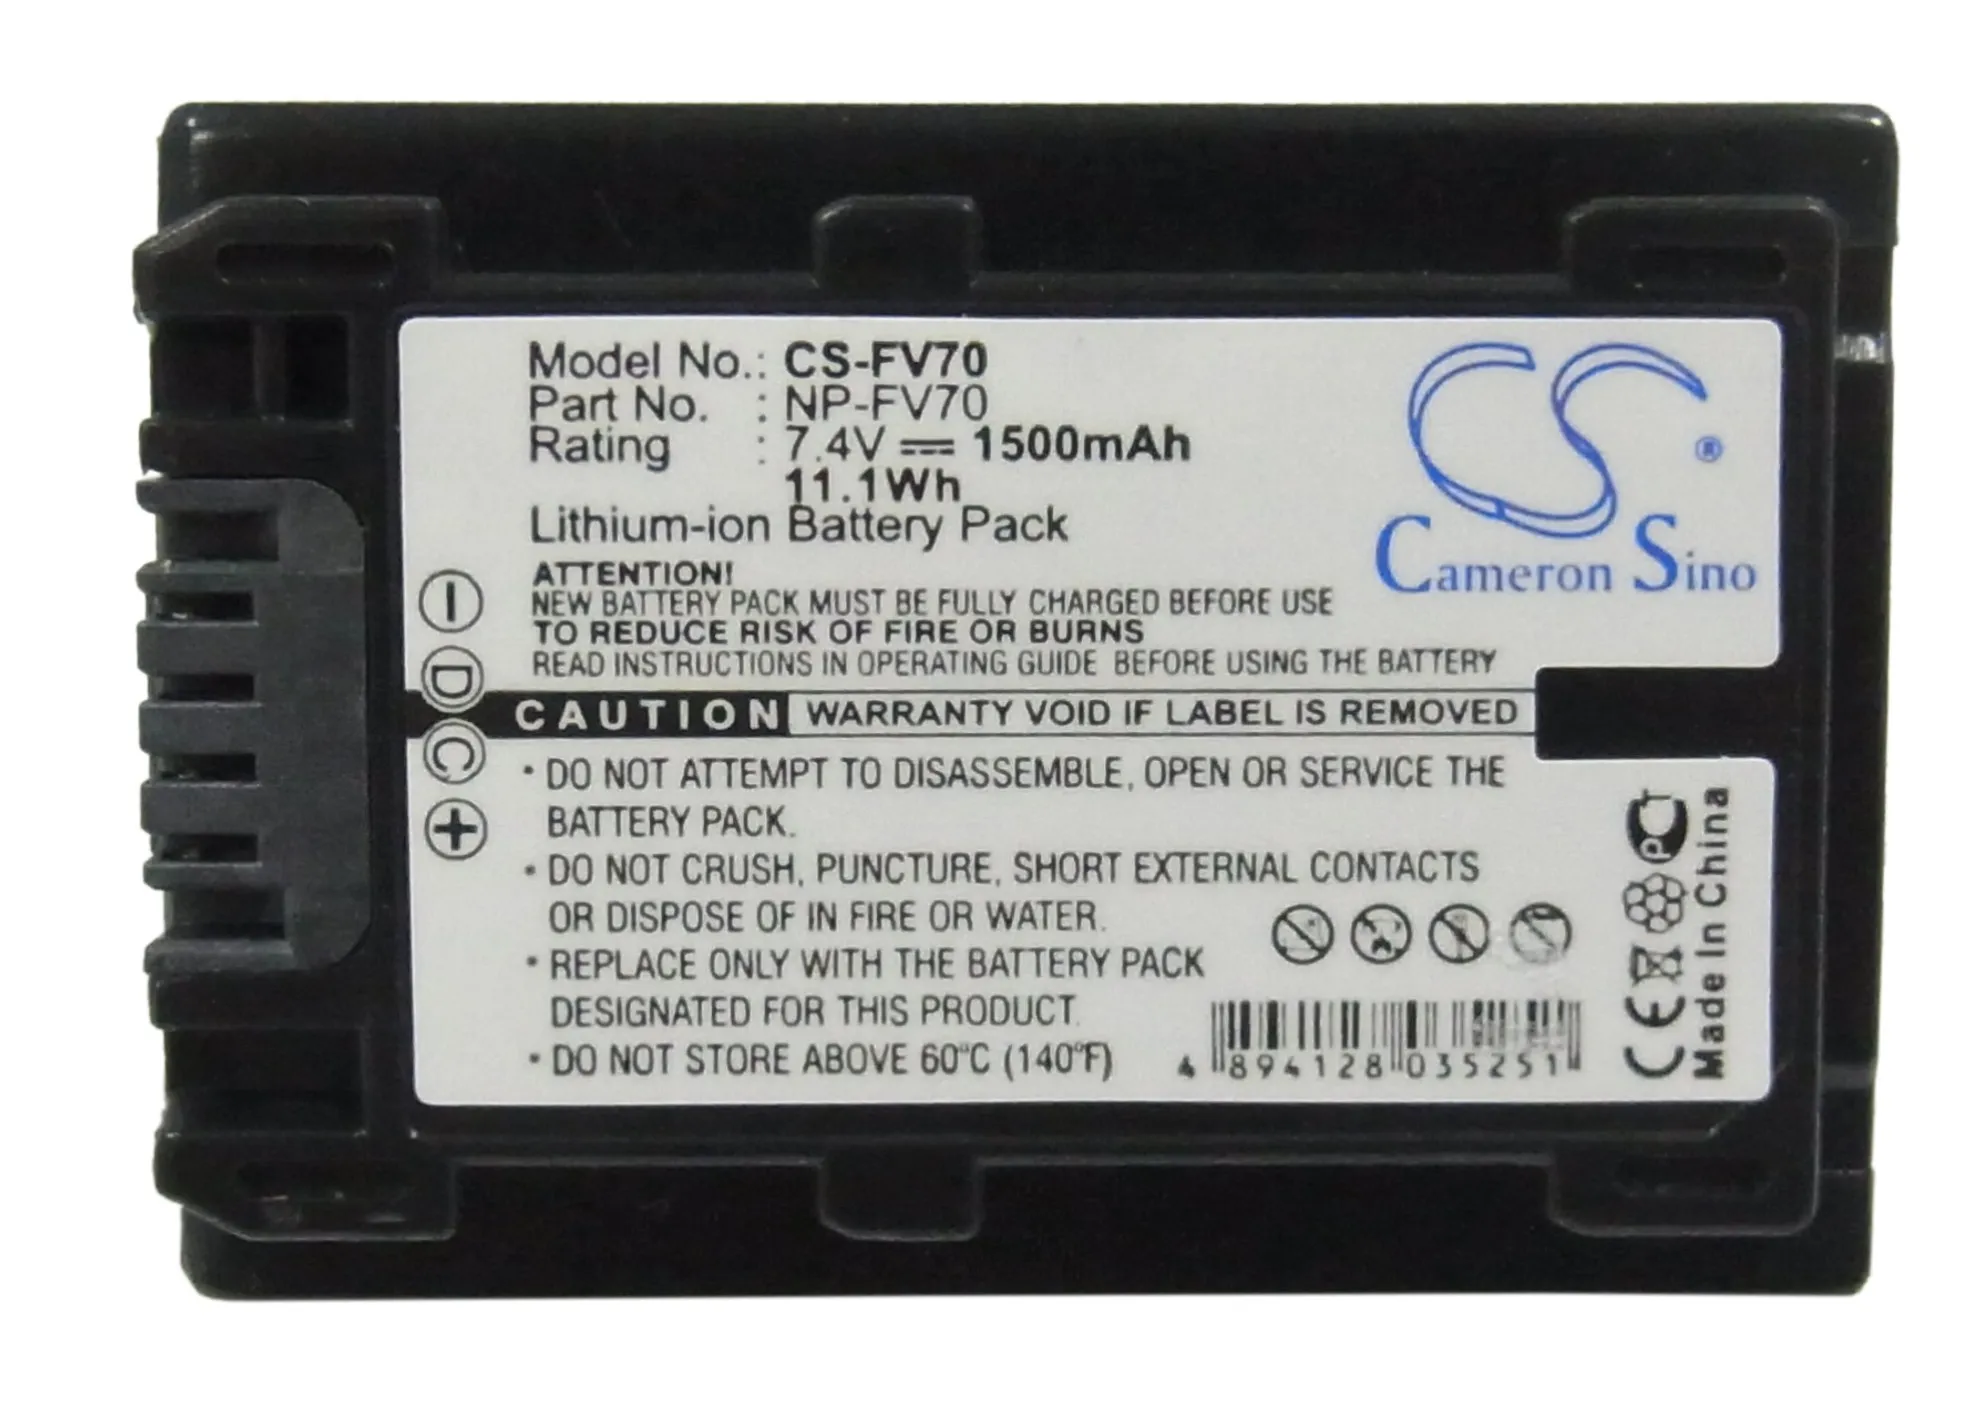 

Camera 1500mAh Battery For Sony NP-FV70 HDR-TG1 HDR-TG3E HDR-TG5 DSC-HX1 DSLR-A230 DSLR-A330 HDR-TG5/E DCR-SR68